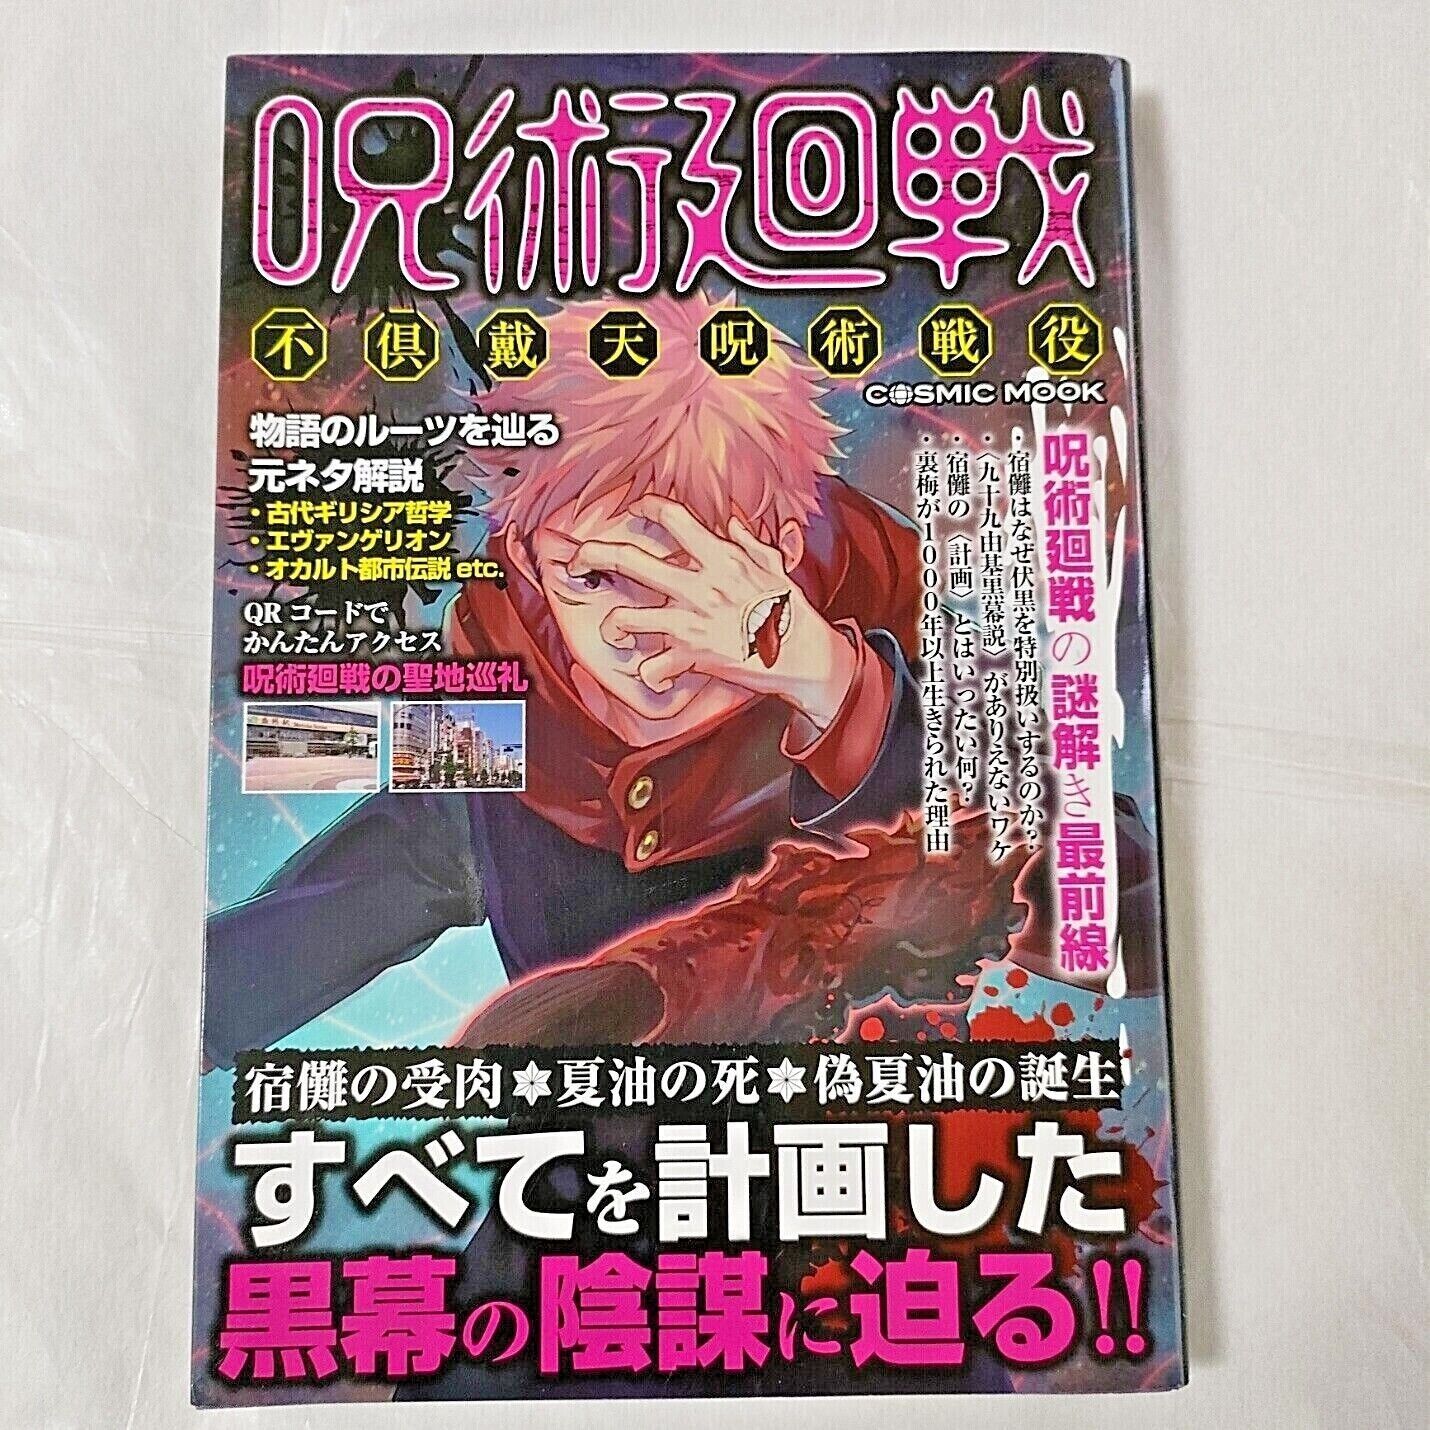 Jujutsu Kaisen Mystery solving story roots commentary book Japanese Very Rare